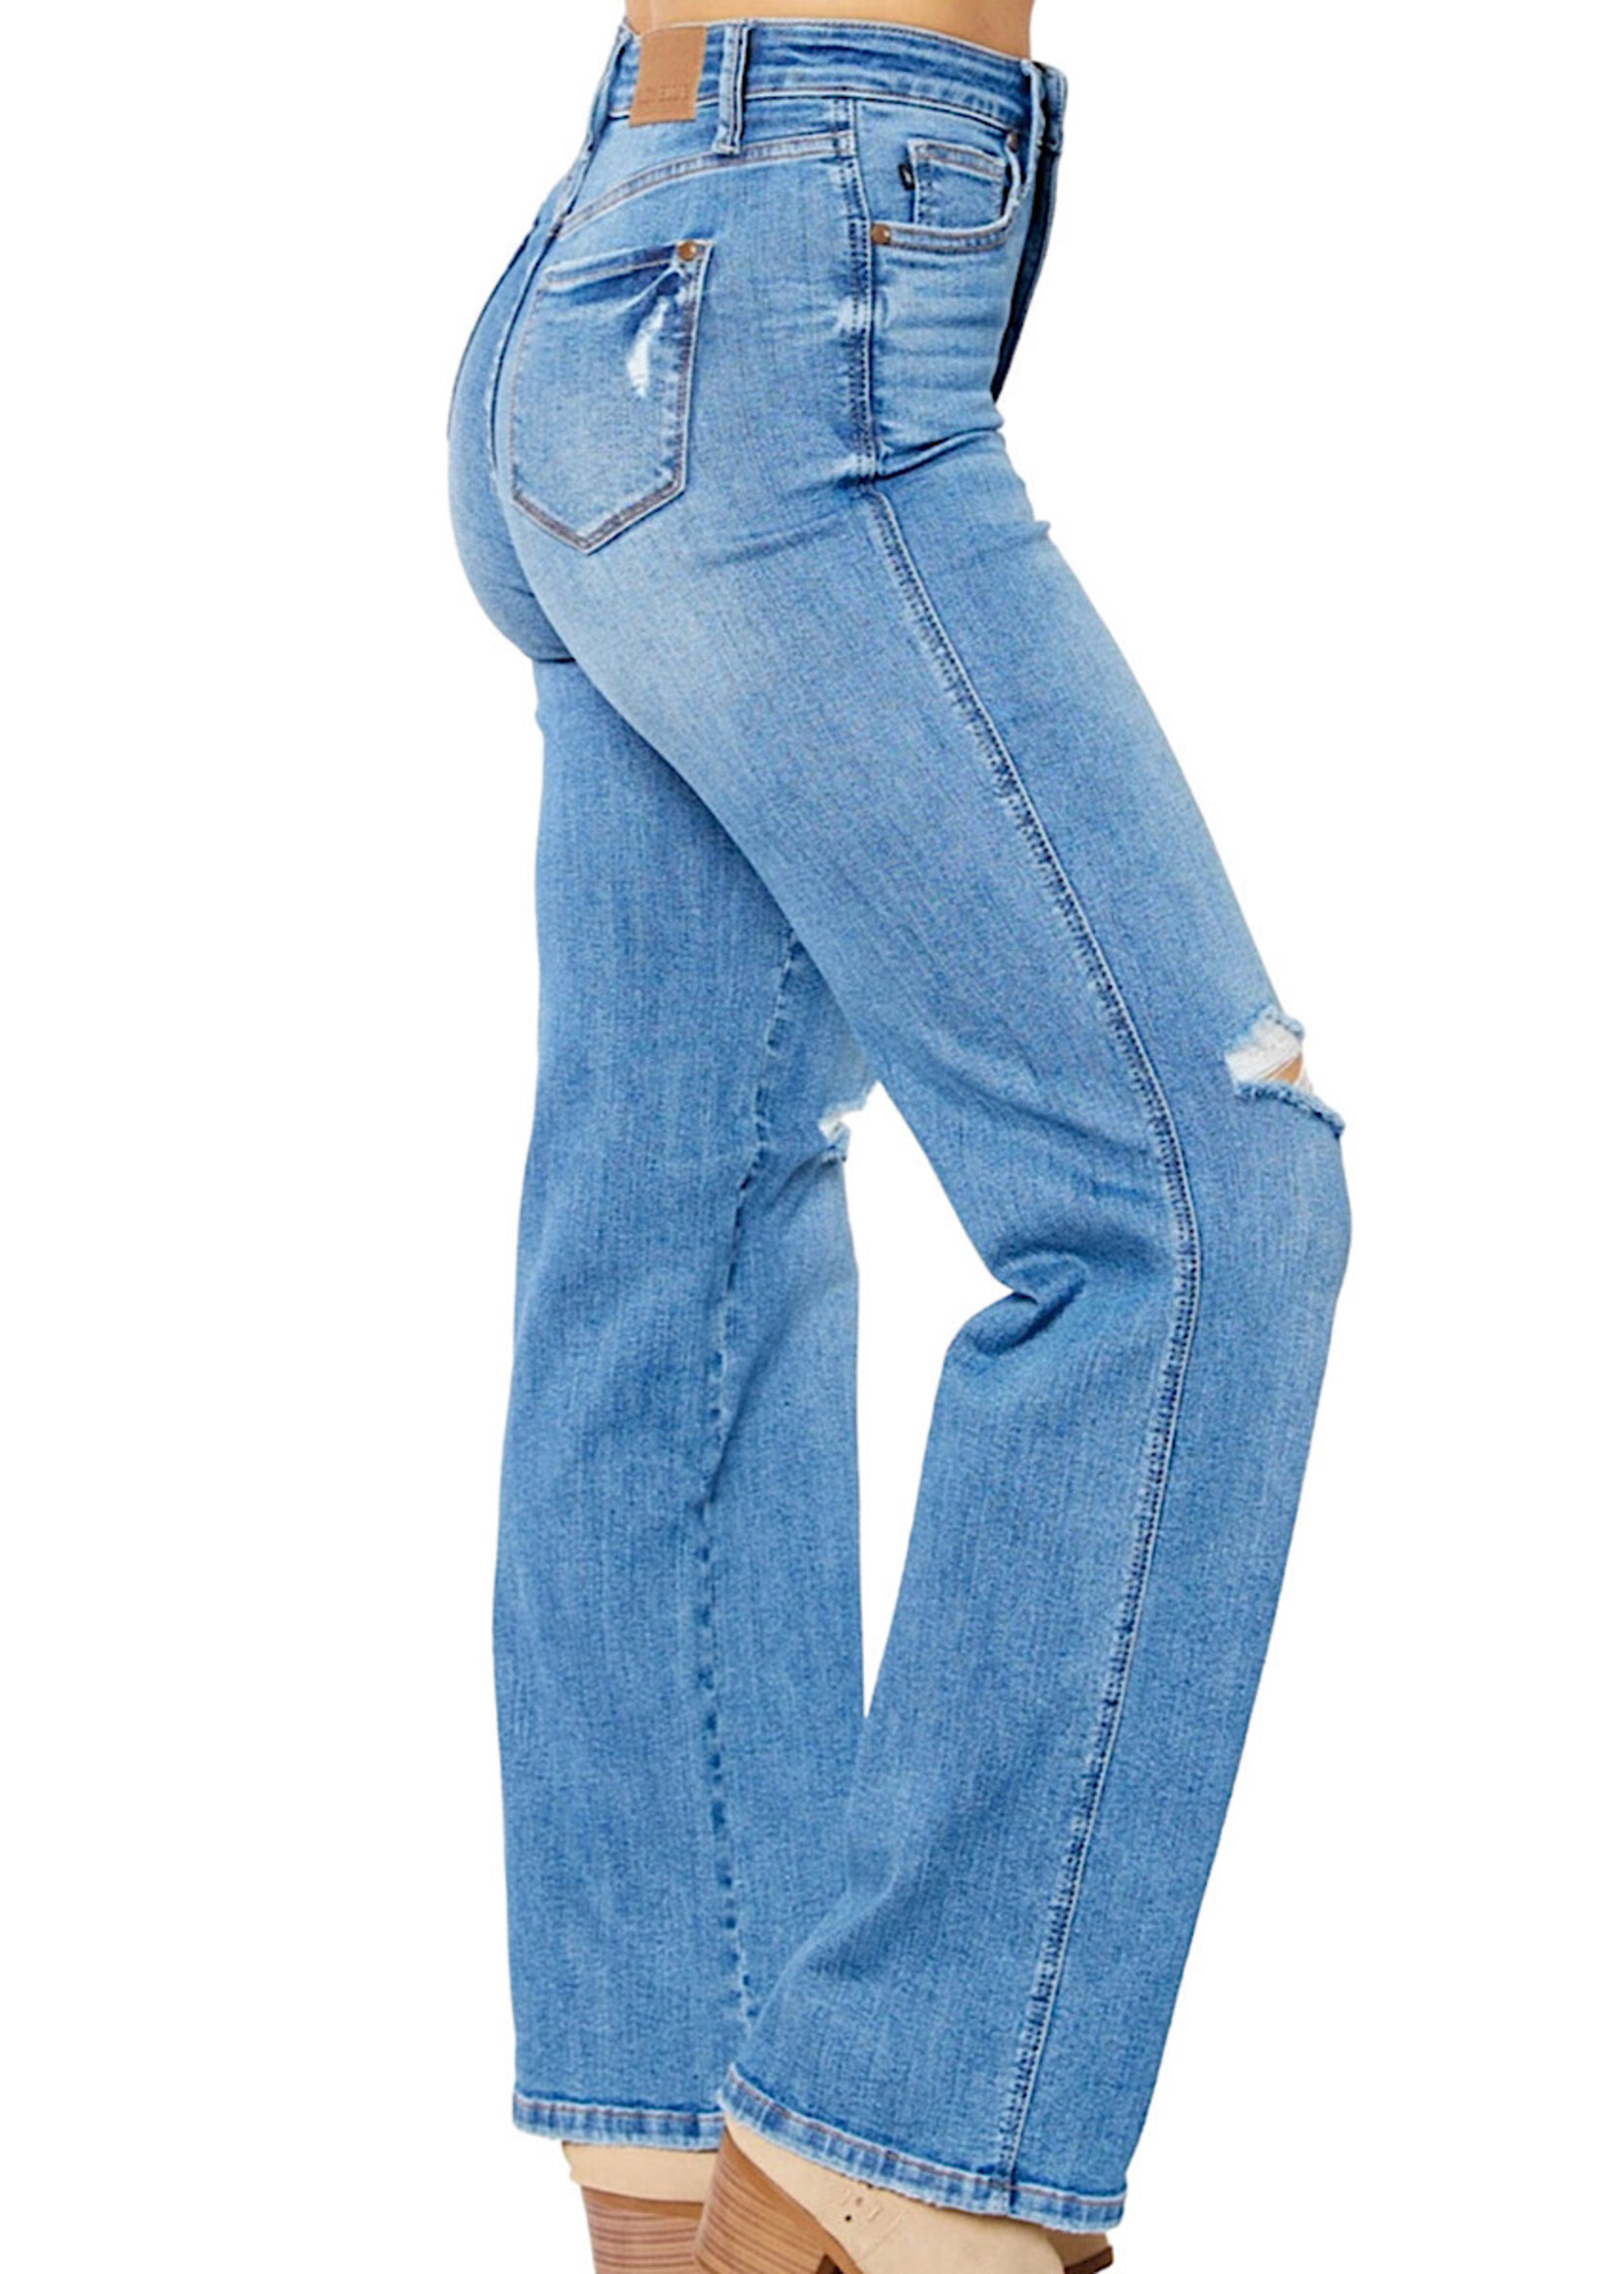 👖 Booty Poppin' Judy Blue Jeans! 